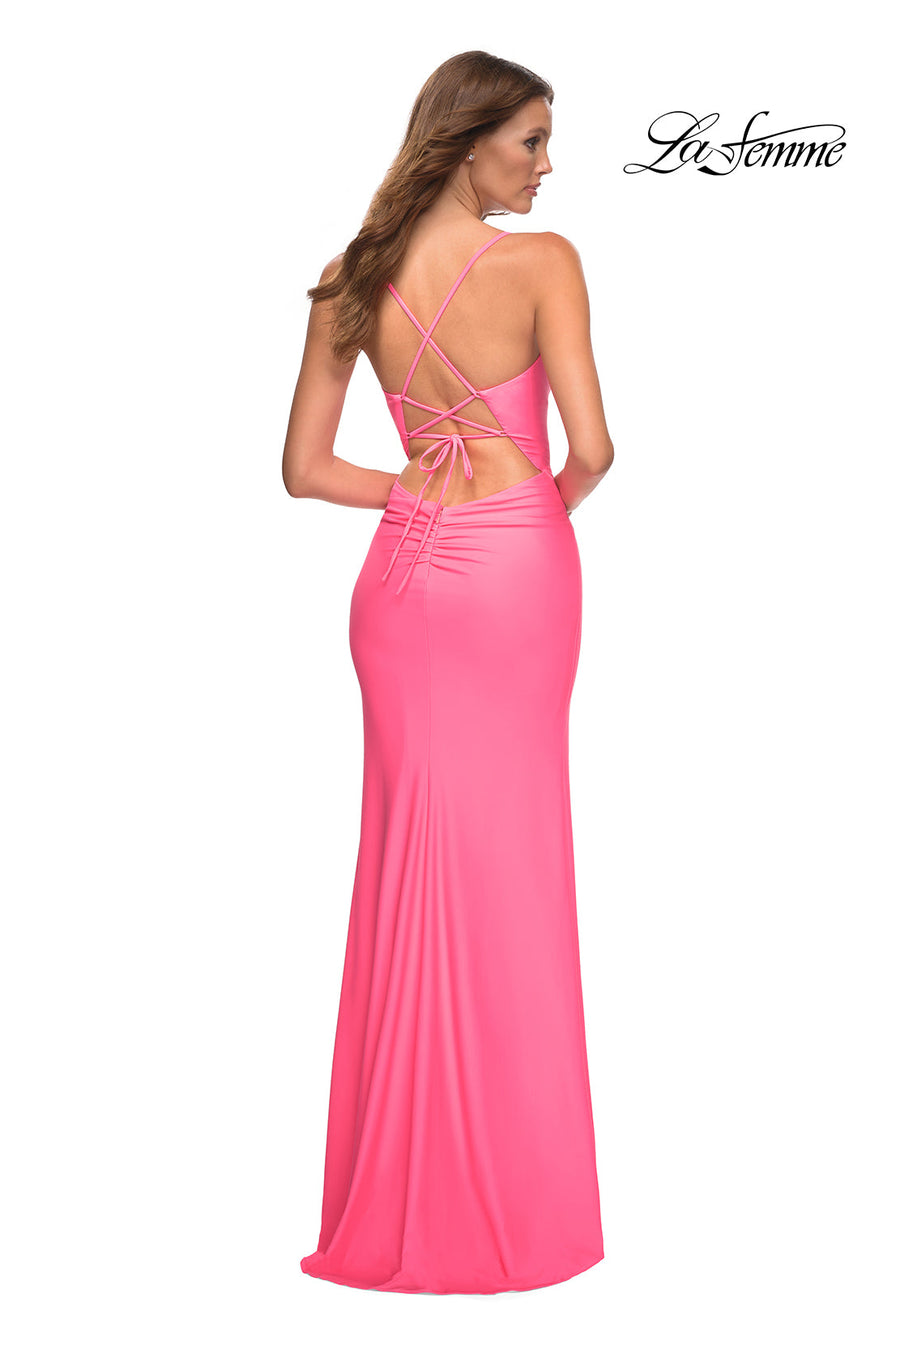 La Femme 30661 prom dress images.  La Femme 30661 is available in these colors: Light Coral.